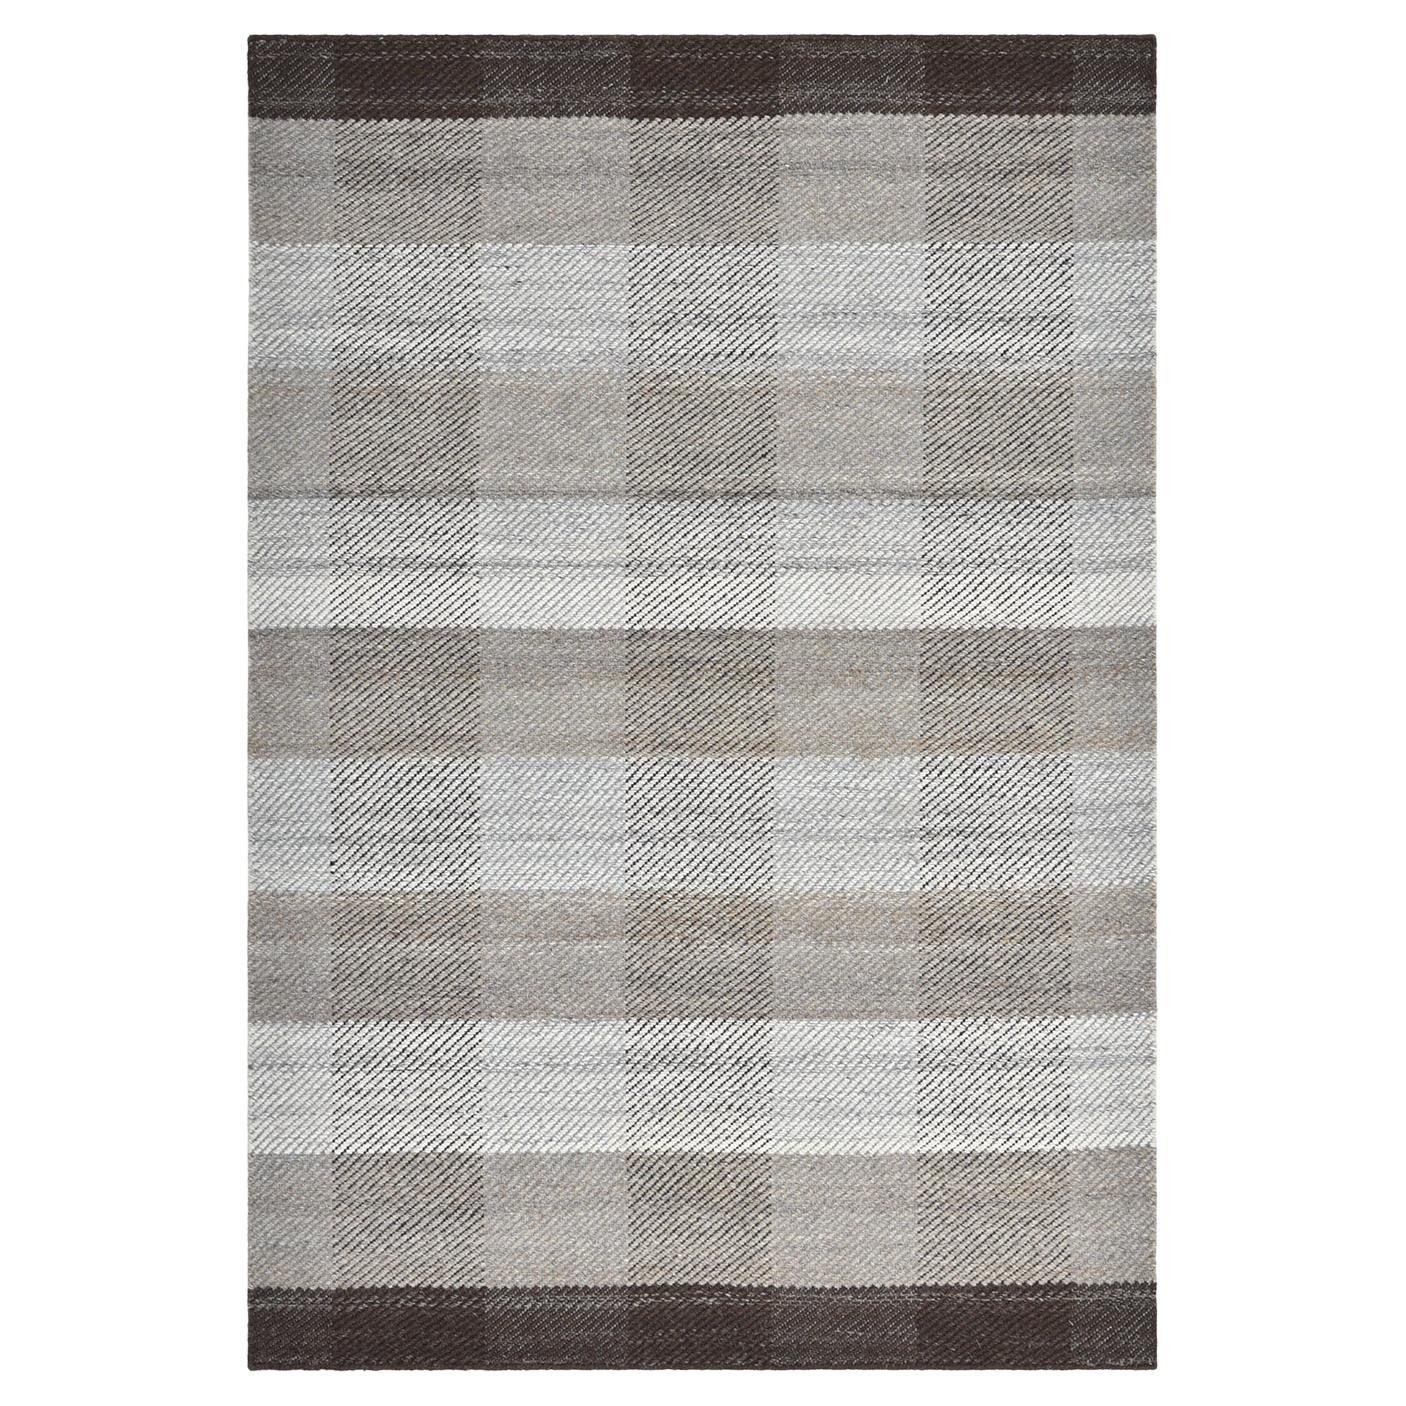 Solo Rugs Flatweave Checkered Hand Woven Brown Area Rug